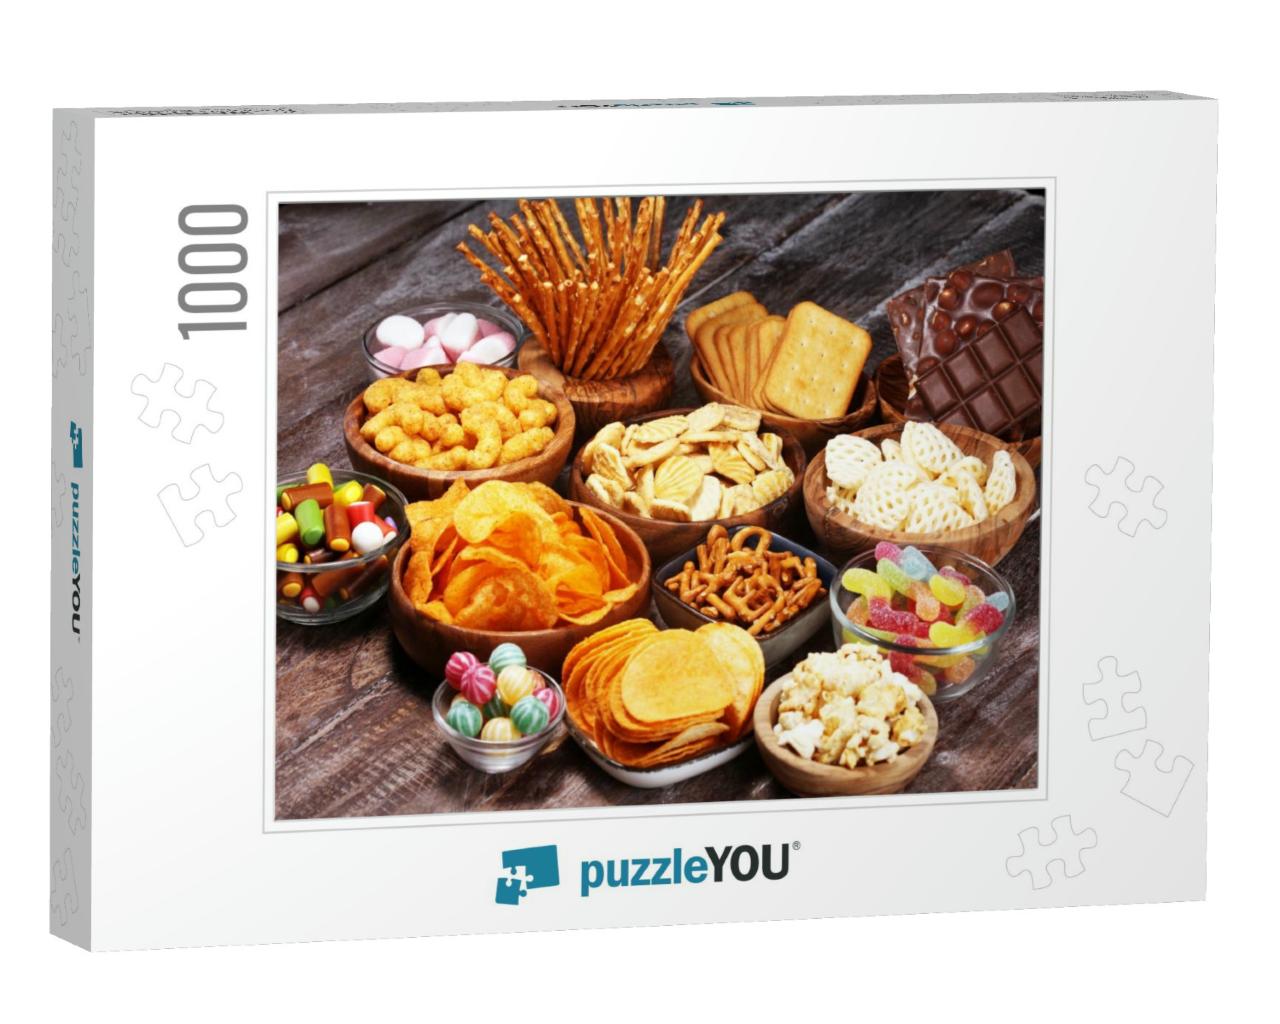 Salty Snacks. Pretzels, Chips, Crackers in Wooden Bowls... Jigsaw Puzzle with 1000 pieces